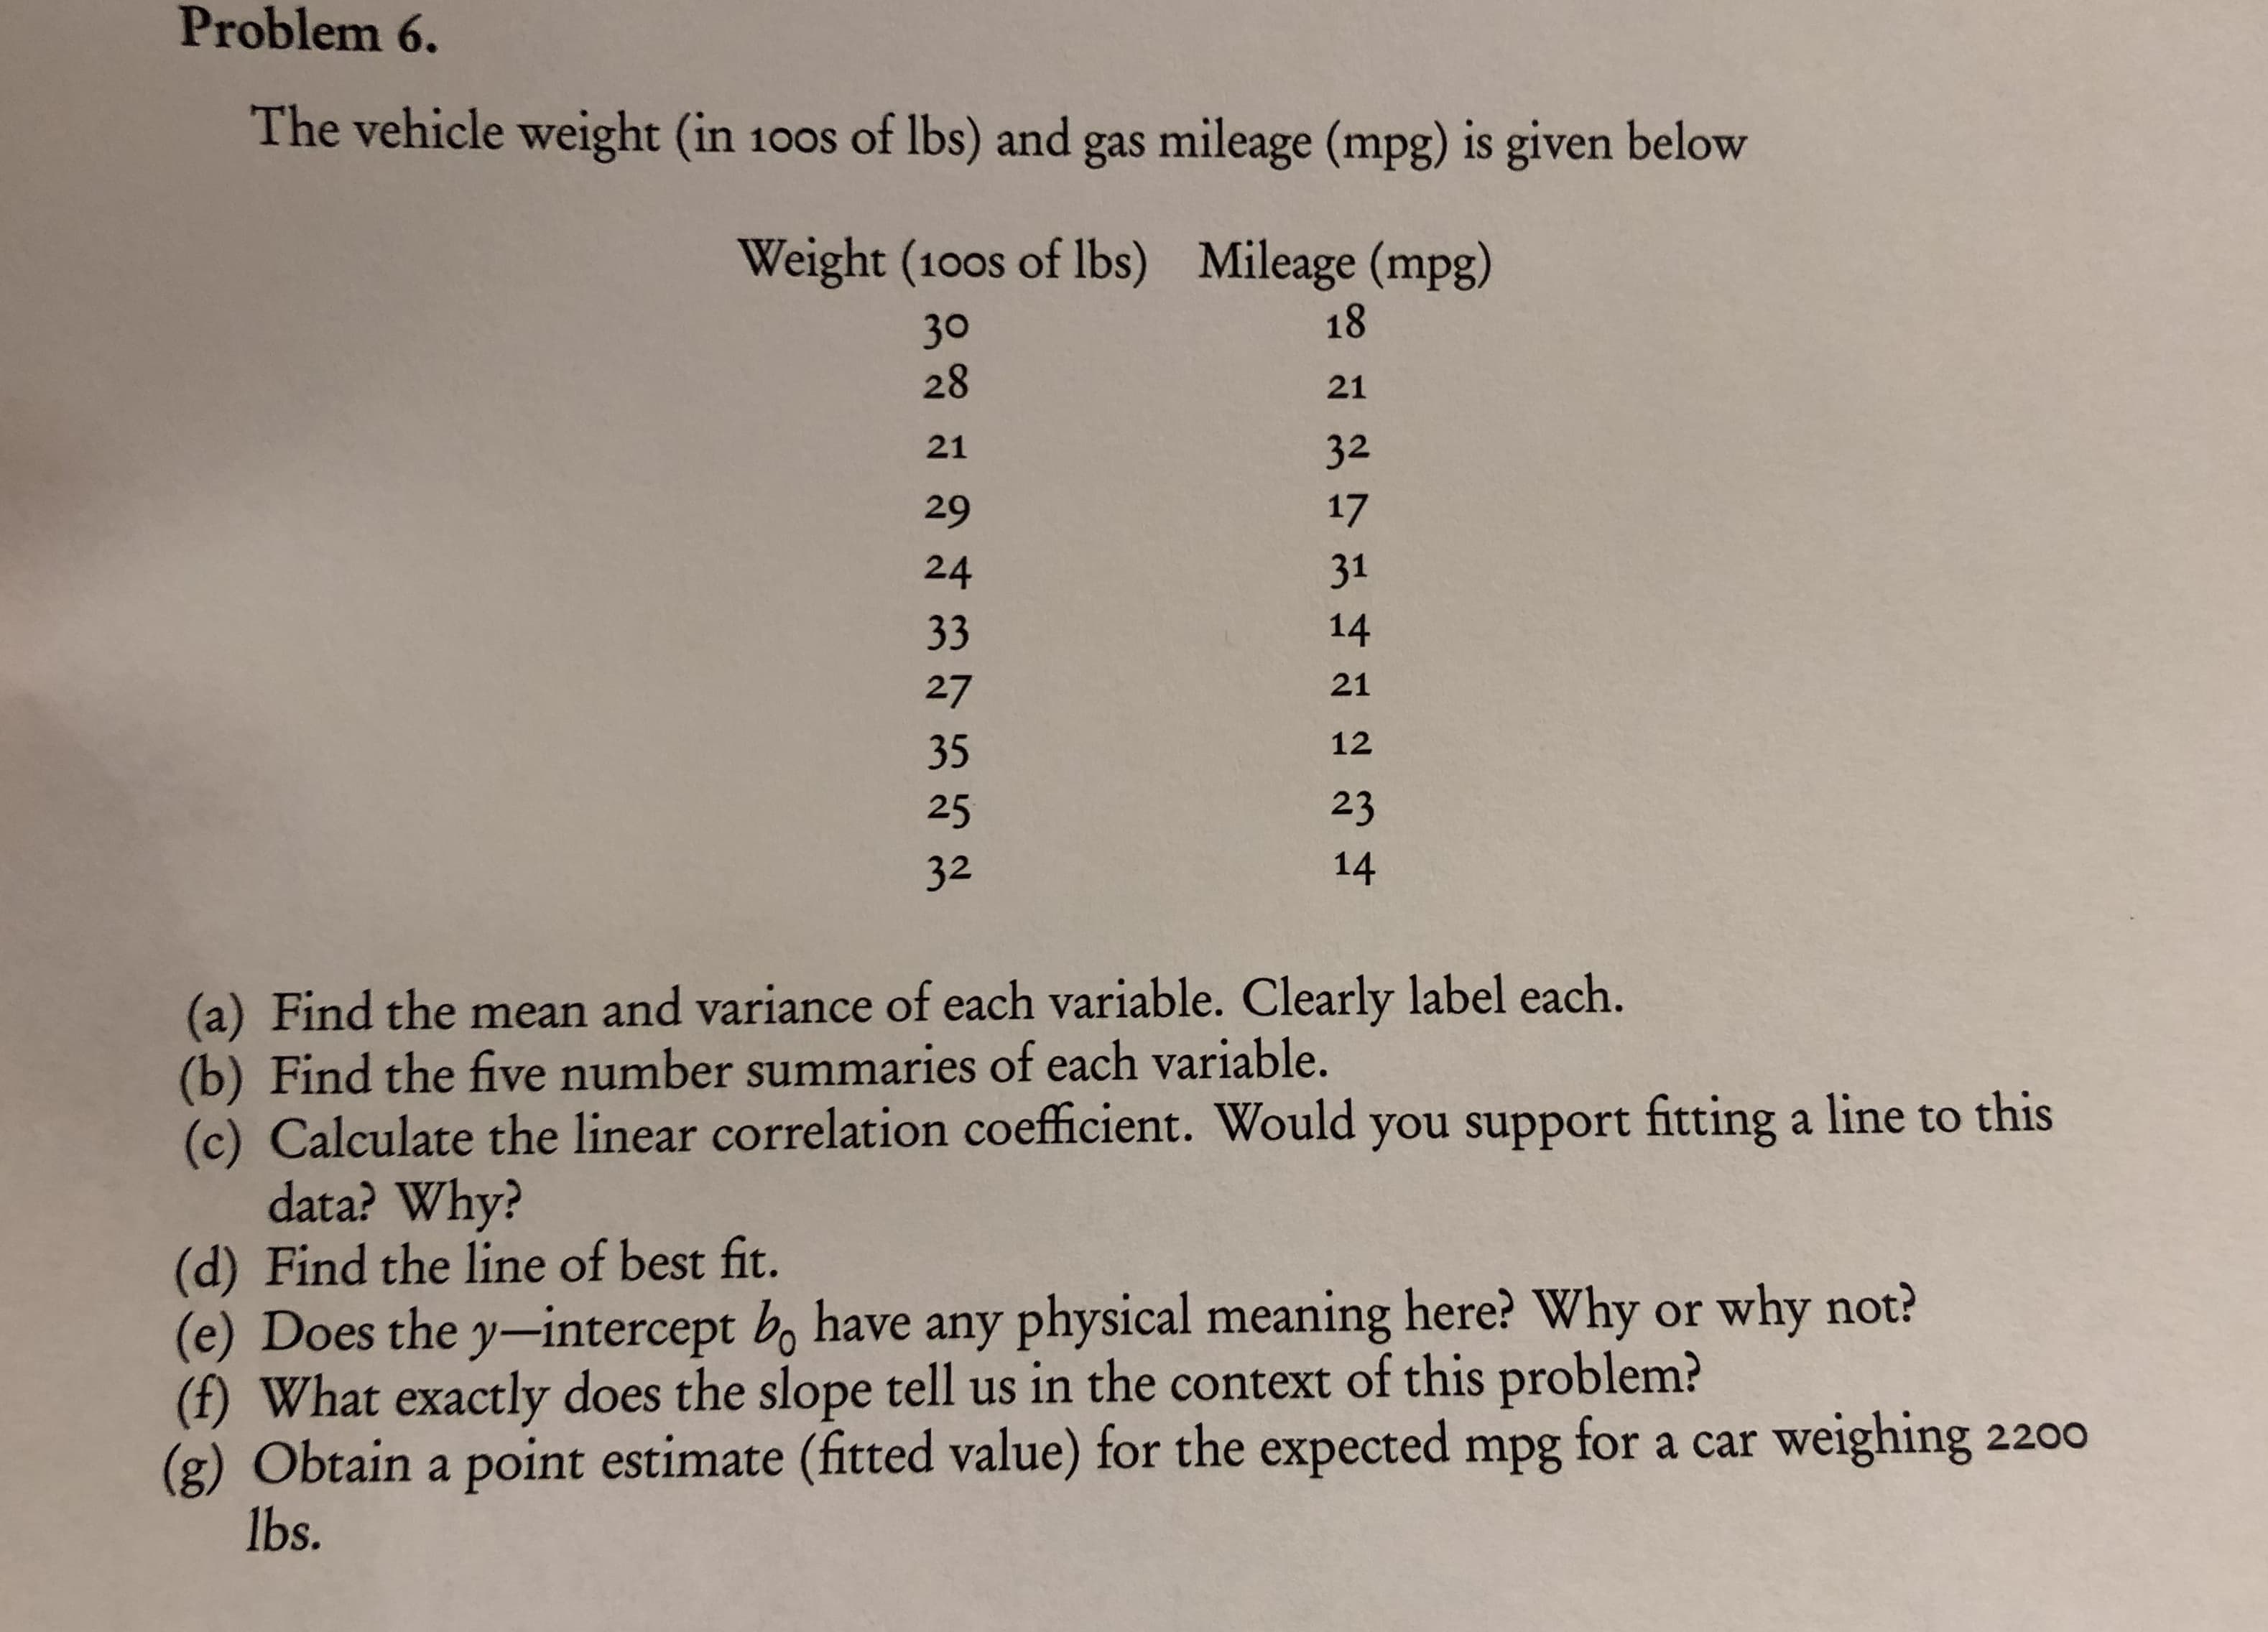 Problem 6.
The vehicle weight (in 100s of lbs) and gas mileage (mpg) is given below
Weight (100s of lbs)
Mileage (mpg)
18
30
28
21
32
21
29
17
24
31
14
33
21
27
12
35
23
25
14
32
(a) Find the mean and variance of each variable. Clearly label each.
(b) Find the five number summaries of each variable.
(c) Calculate the linear correlation coefficient. Would you support fitting a line to this
data? Why?
(d) Find the line of best fit.
(e) Does the y-intercept bo have any physical meaning here? Why or why not?
(f) What exactly does the slope tell us in the context of this problem?
(g) Obtain a point estimate (fitted value) for the expected mpg for a car weighing 2200
lbs.
